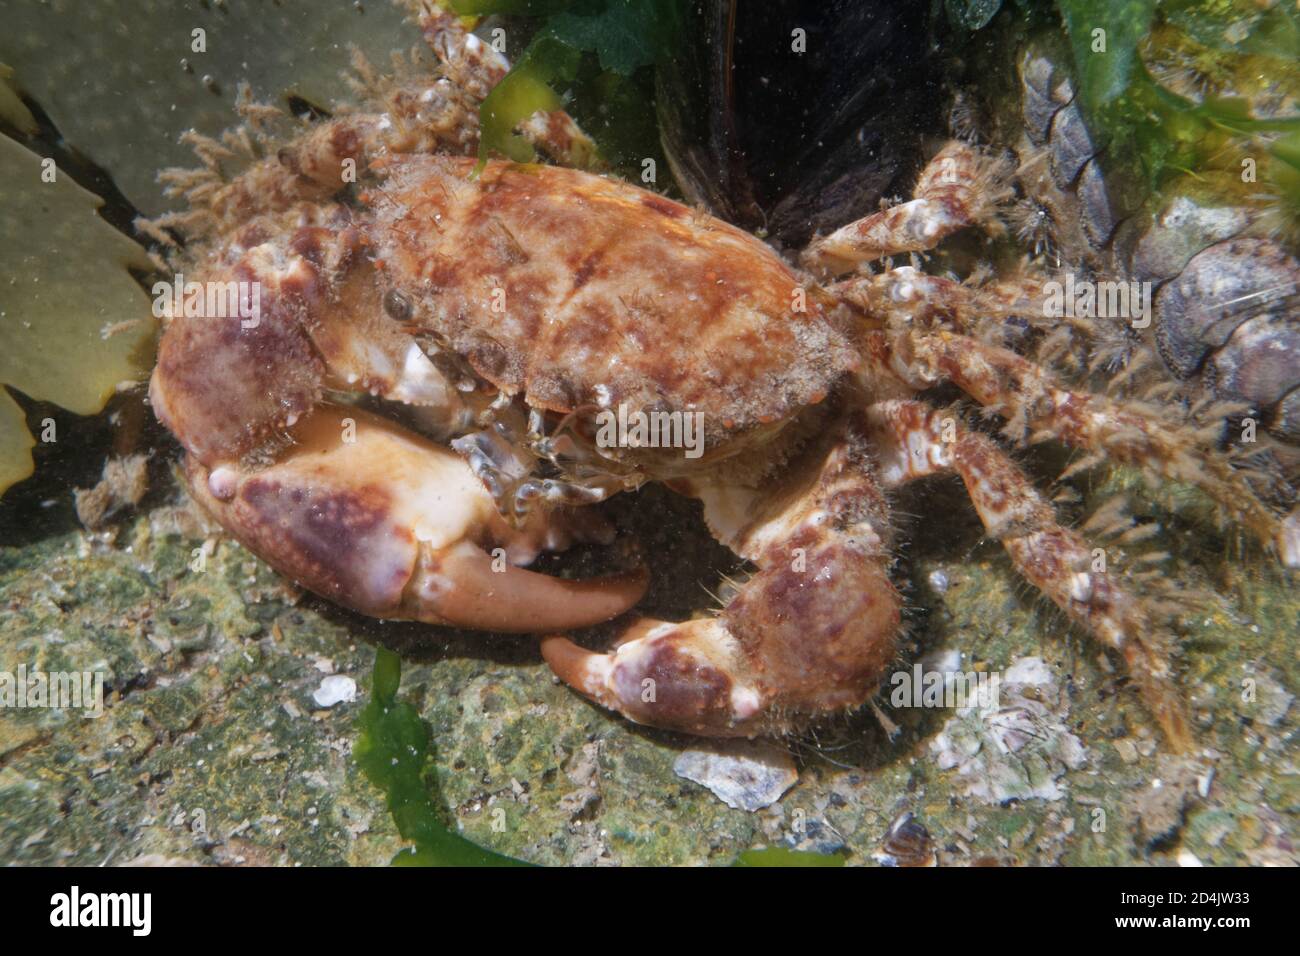 Hairy crab (Pilumnus hirtellus) among seaweed fronds in a rock pool, The Gower, Wales, UK, August. Stock Photo